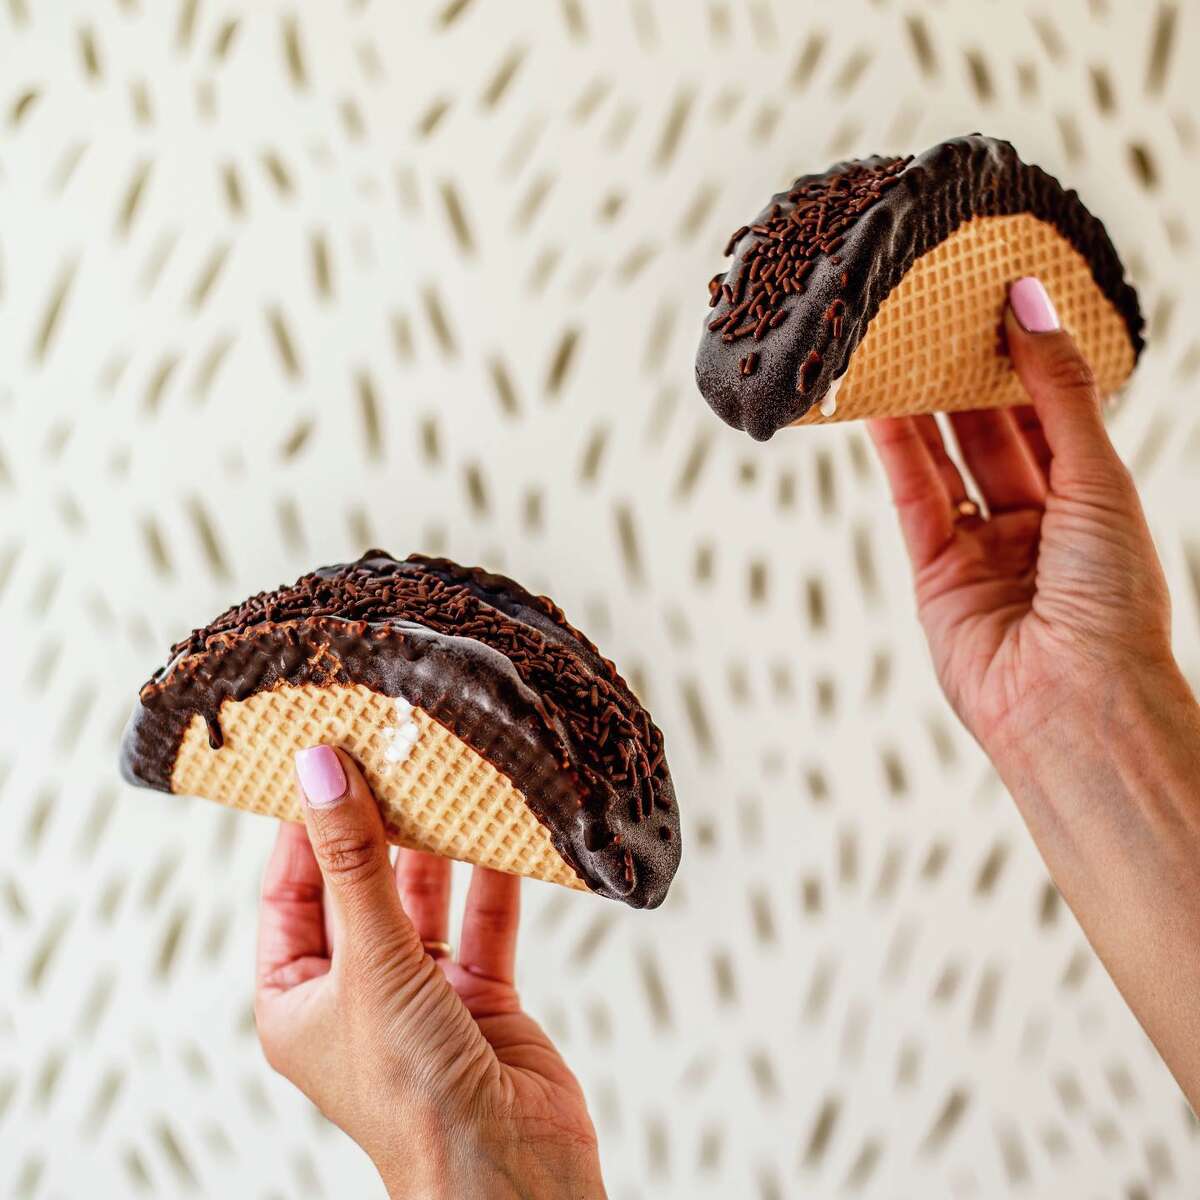 Dom's Creamery in Avon features its own version of the Choco Taco, available on Tuesdays.